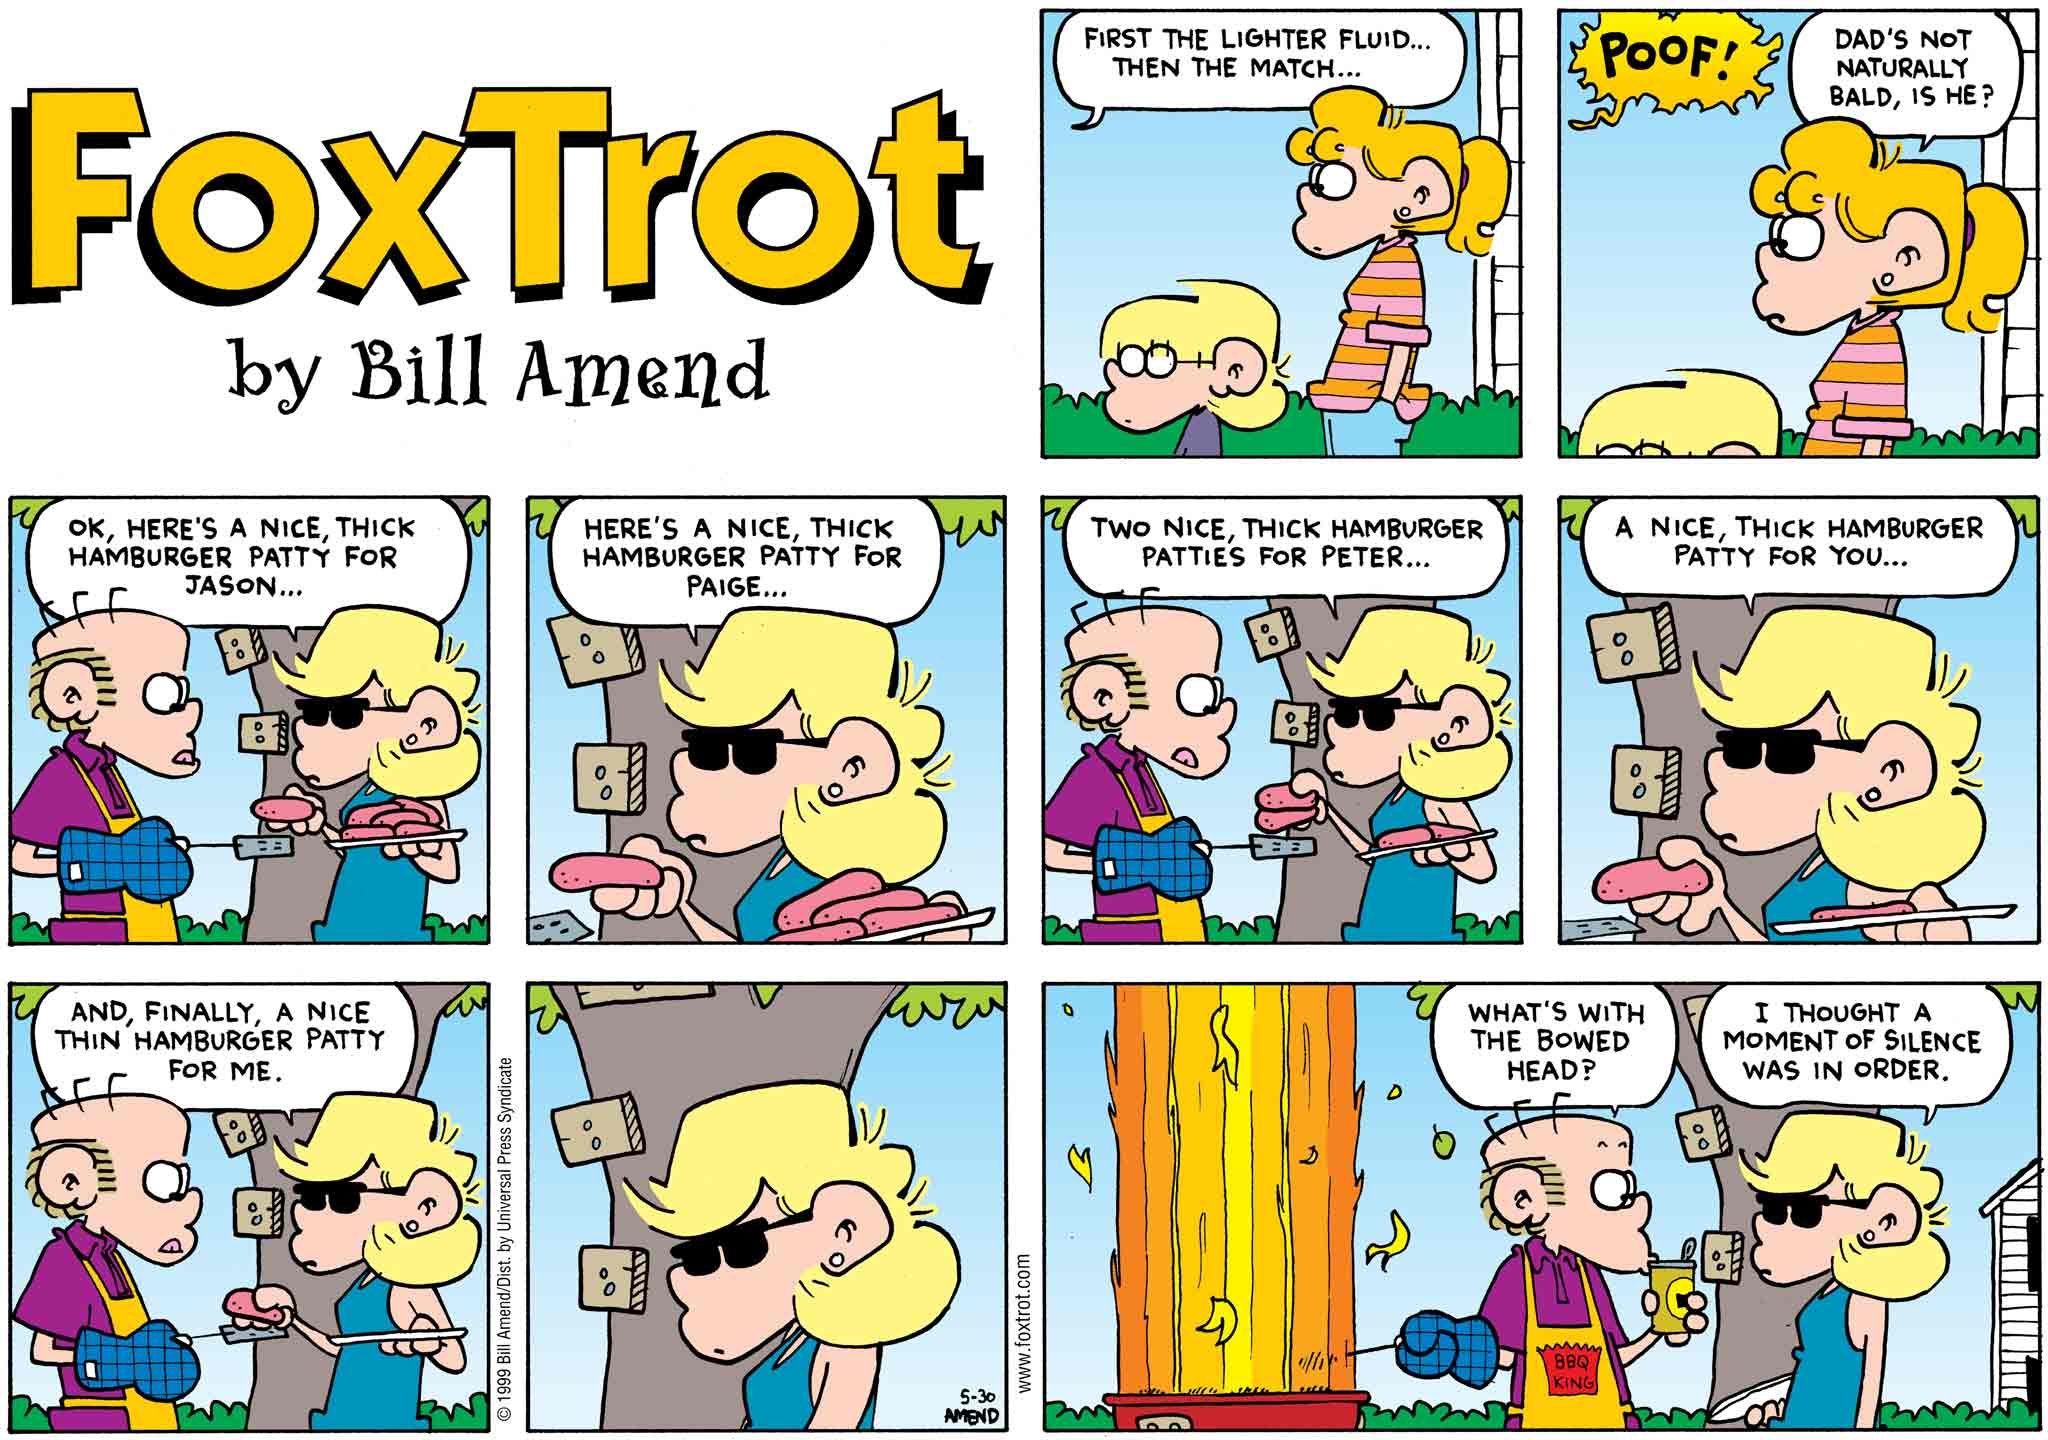 FoxTrot by Bill Amend May 30, 1999 - Summer Comics - Roger: First the lighter fluid... Then the match... POOF! Paige: Dad's not naturally bald, is he? Andy: Ok, Here's a nice, thick hamburger patty for Jason... Here's a nice, thick hamburger patty for Paige... Two nice, thick hamburger patties for Peter... A nice, thick hamburger patty for you... And, finally, a thin hamburger patty for me. Roger: What's with the bowed head? Andy: I thought a moment of silence was in order.